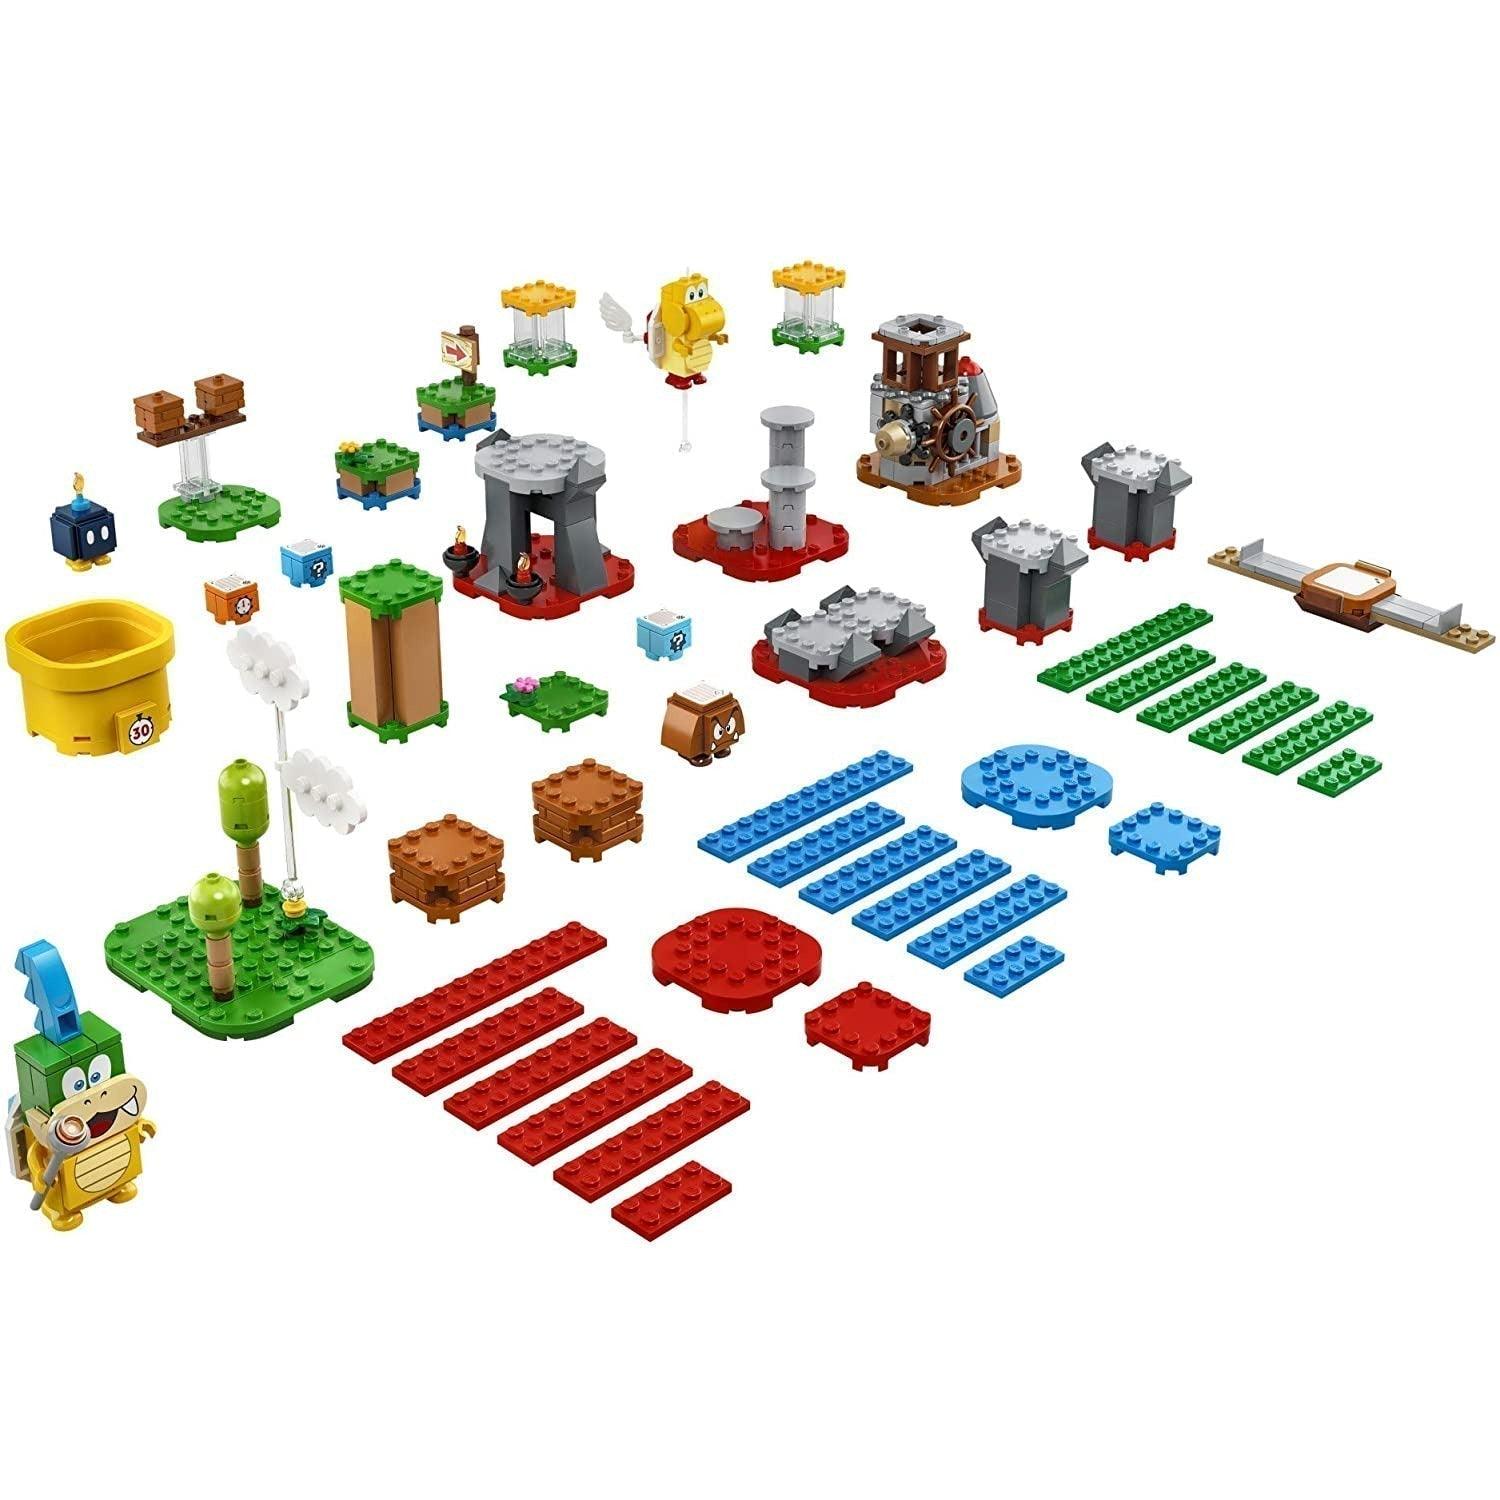 LEGO Super Mario Master Your Adventure Maker Set 71380 Building Kit; Collectible Gift Toy Playset for Creative Kids, New 2021 (366 Pieces) - BumbleToys - 6+ Years, Boys, Girls, LEGO, OXE, Pre-Order, Super Mario